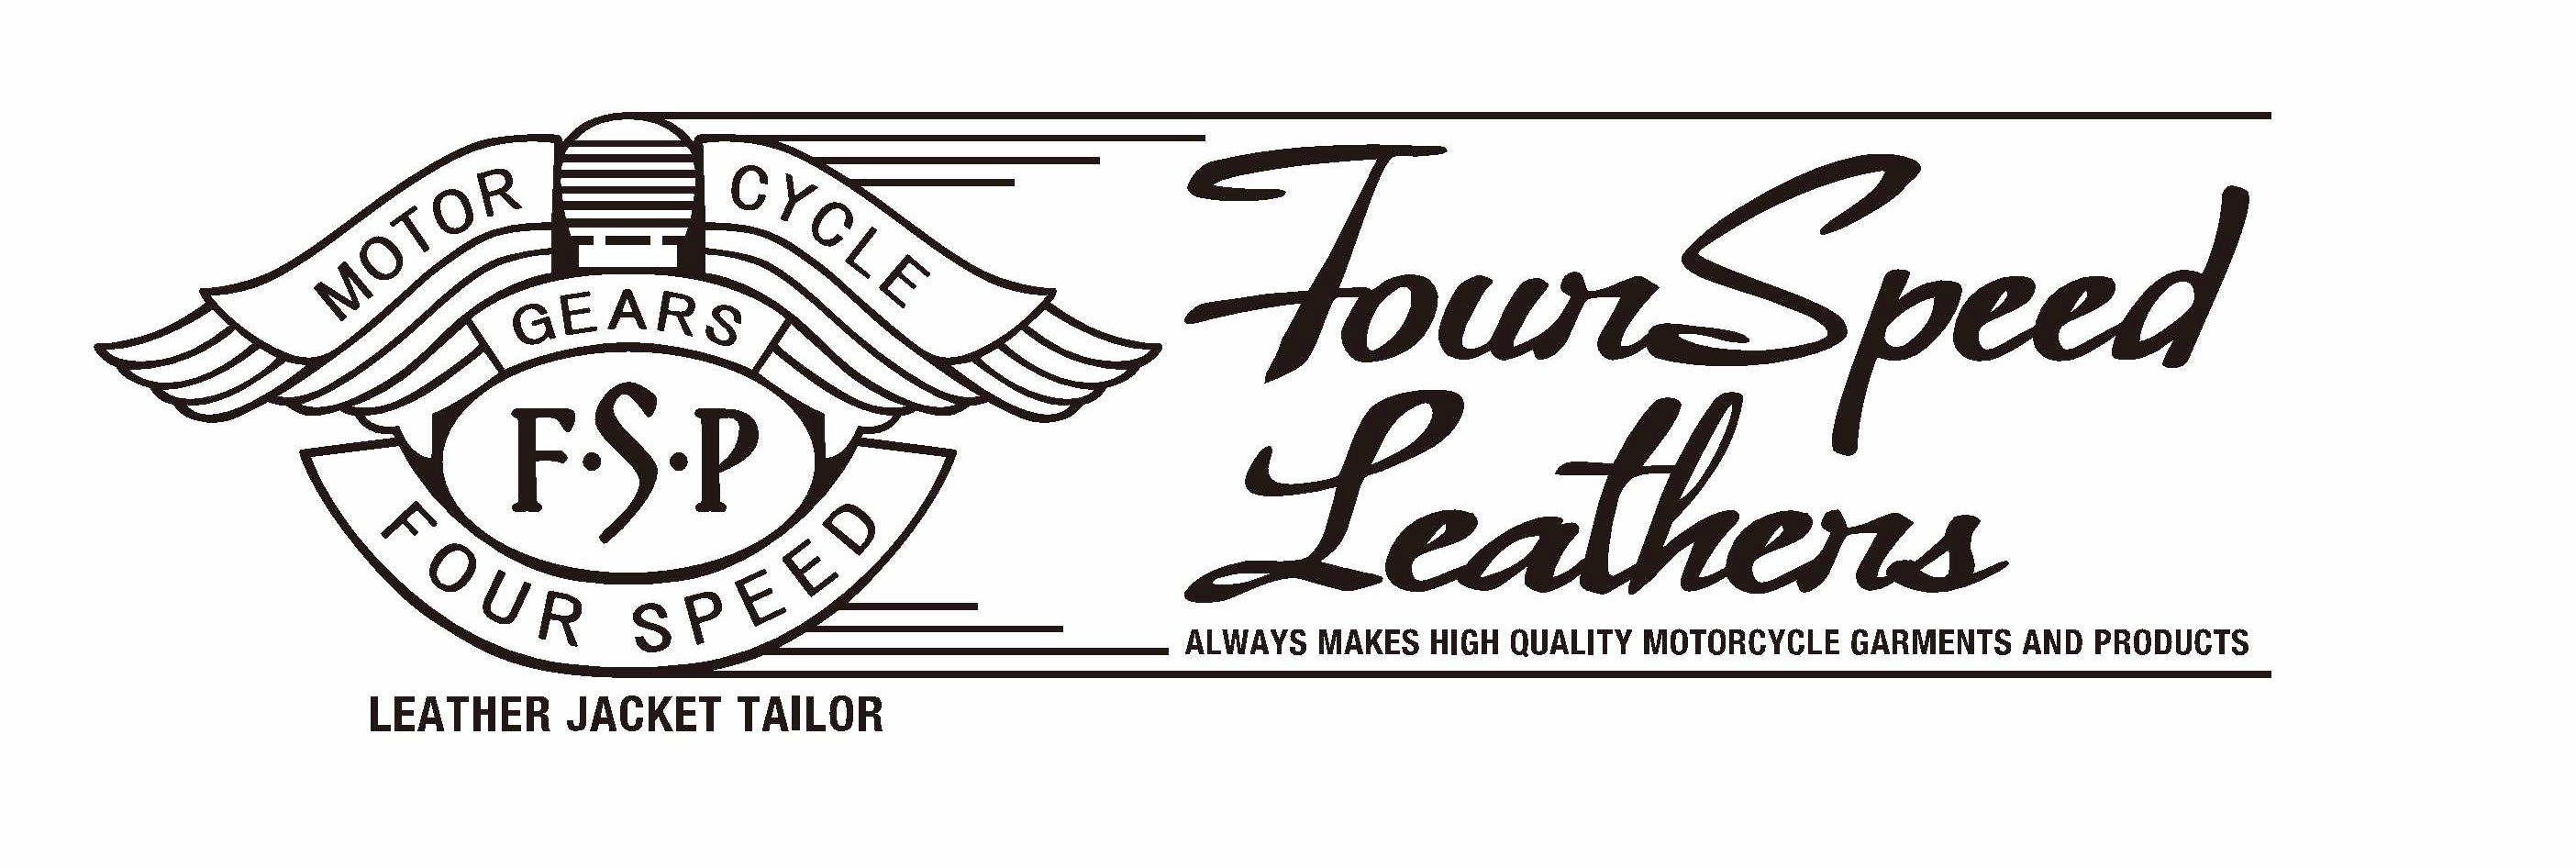 FourSpeed LEATHERS